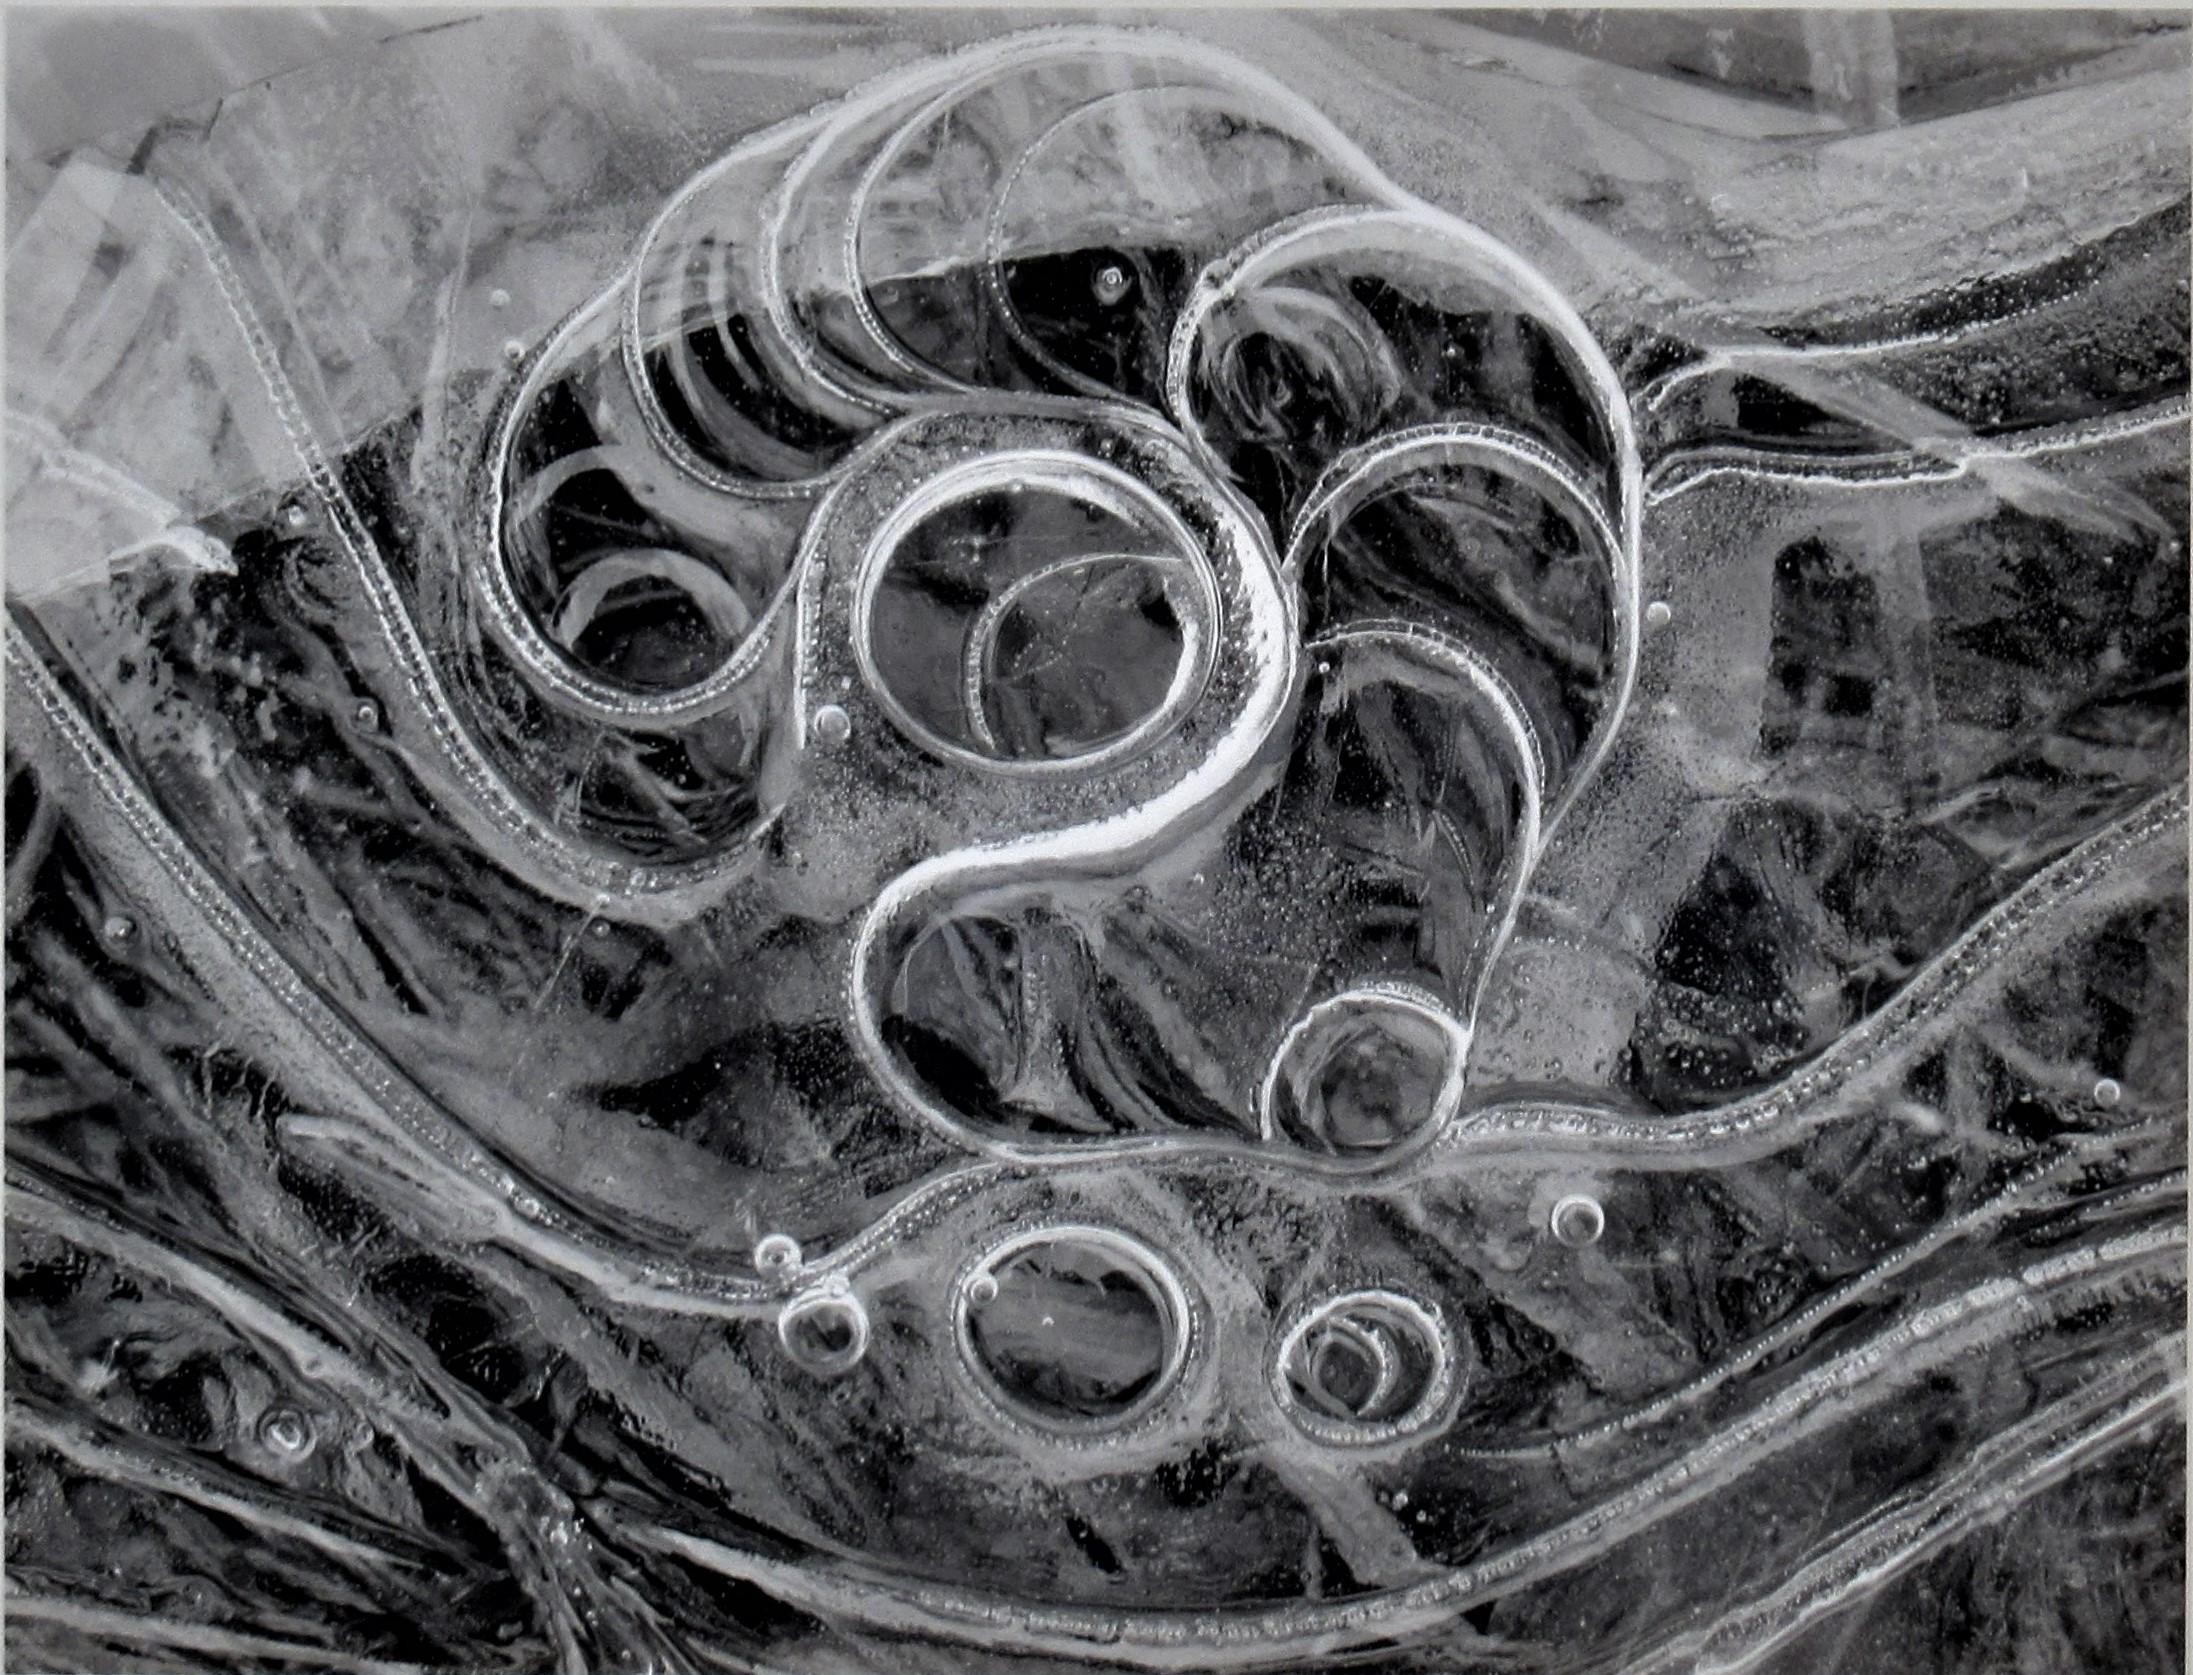 Ice Form #3, Yosemite National Park - Photograph by Huntington Witherill